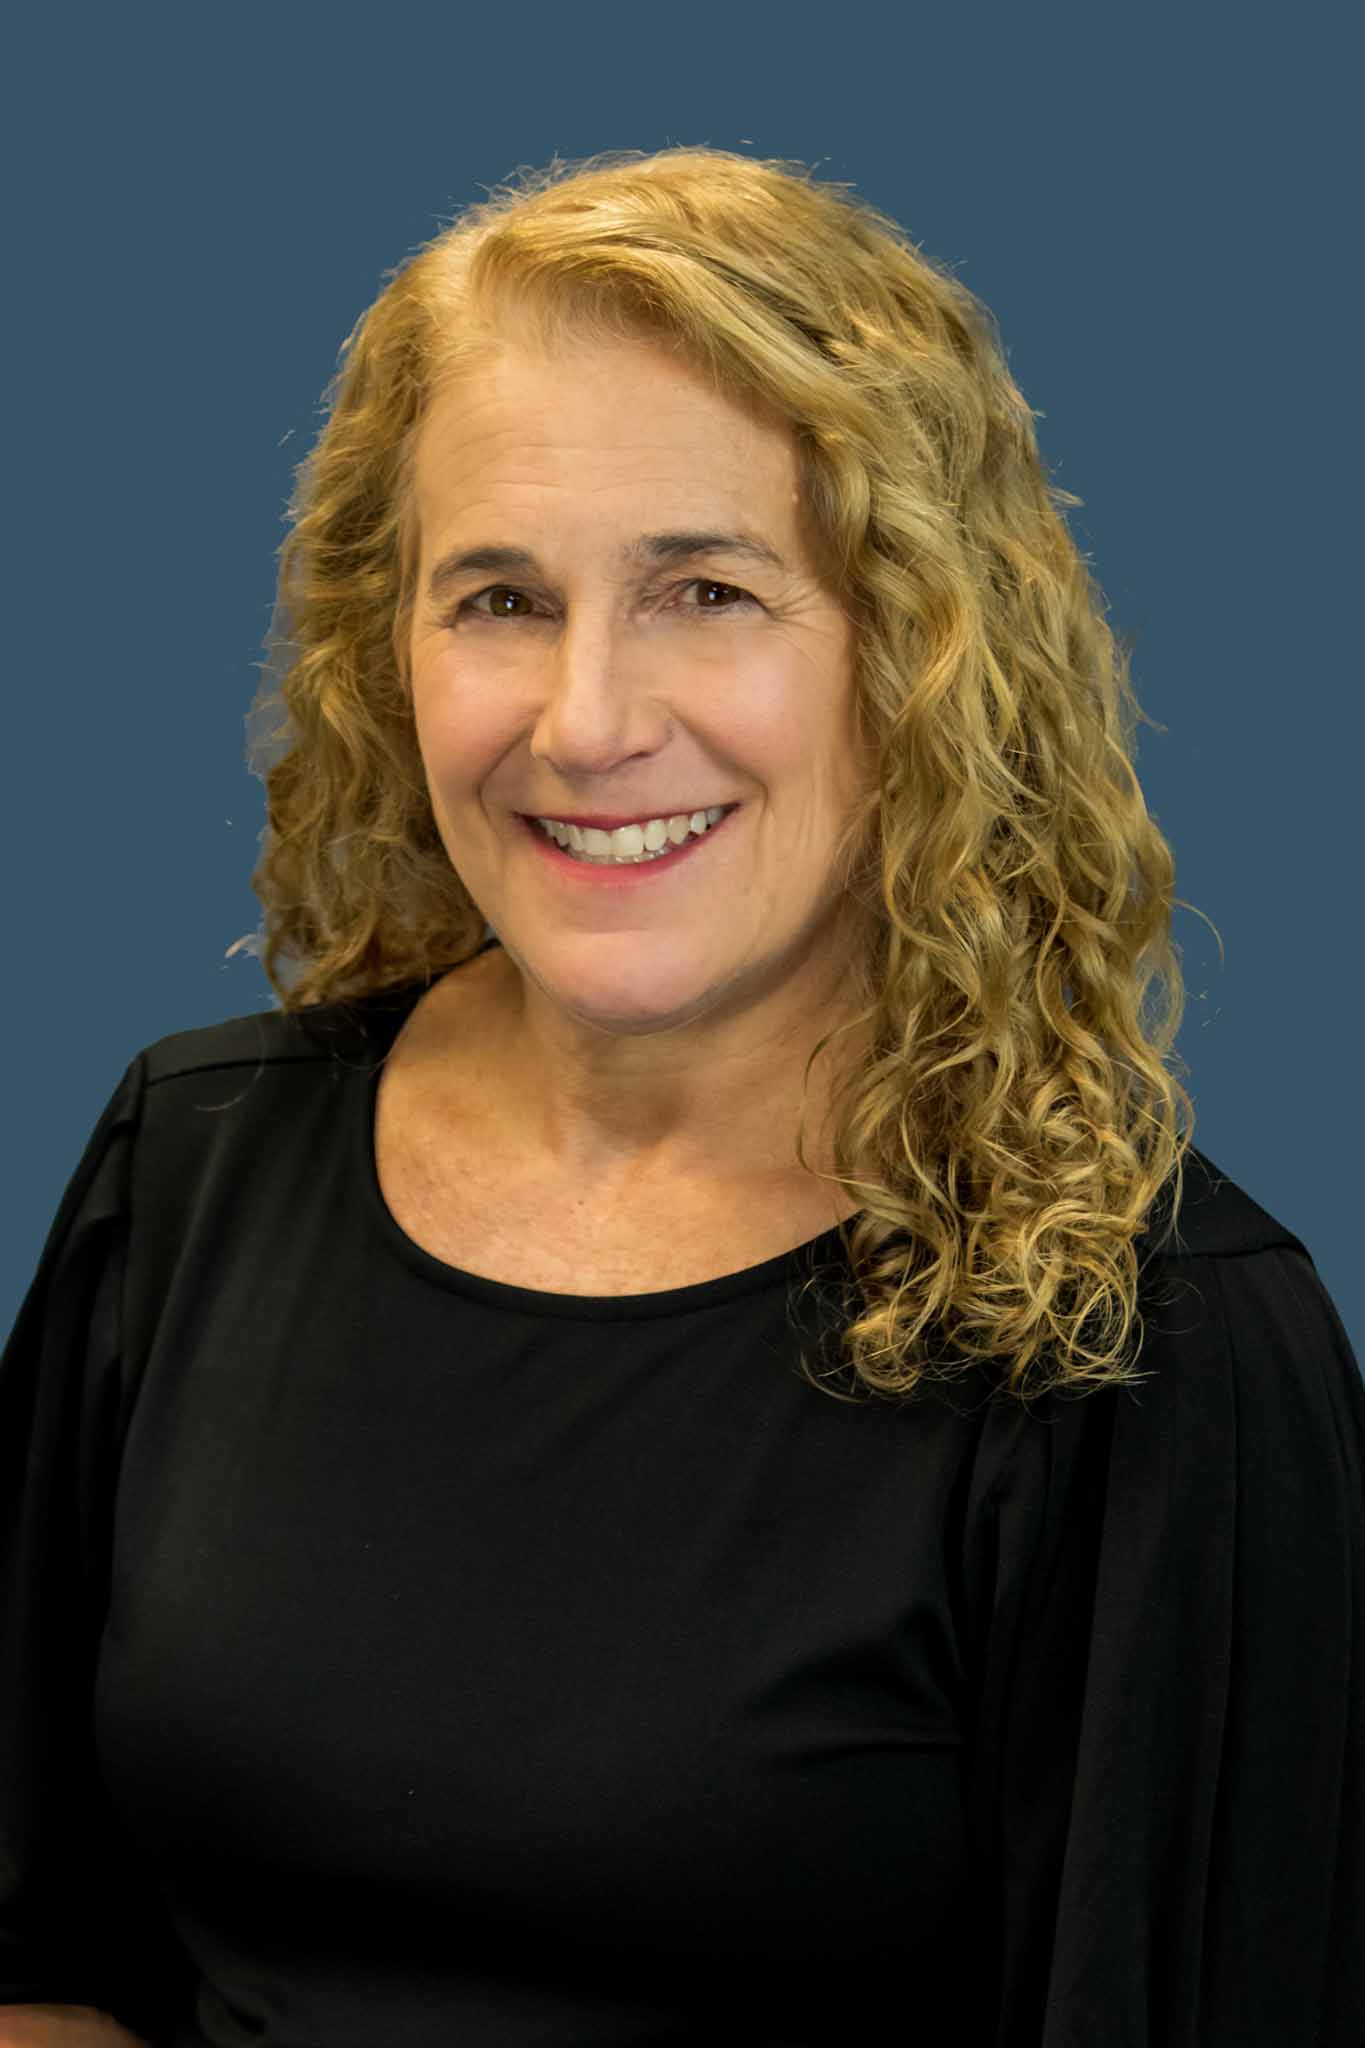 Marcie Jacobs, M.S., F-MAA at Jacobs Audiology